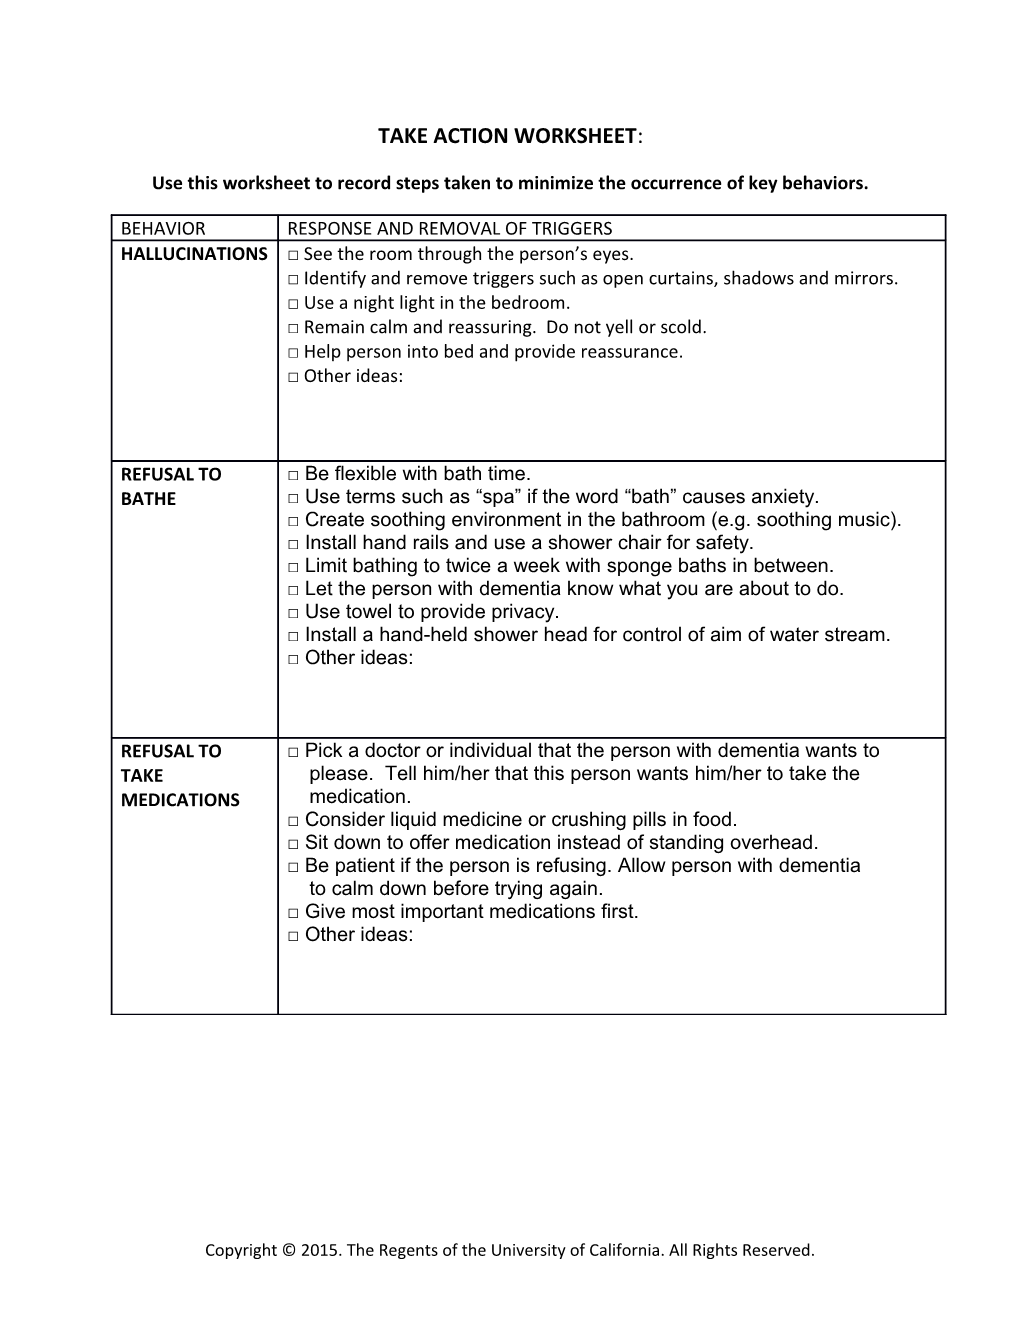 Use This Worksheet to Record Steps Taken to Minimize the Occurrence of Key Behaviors